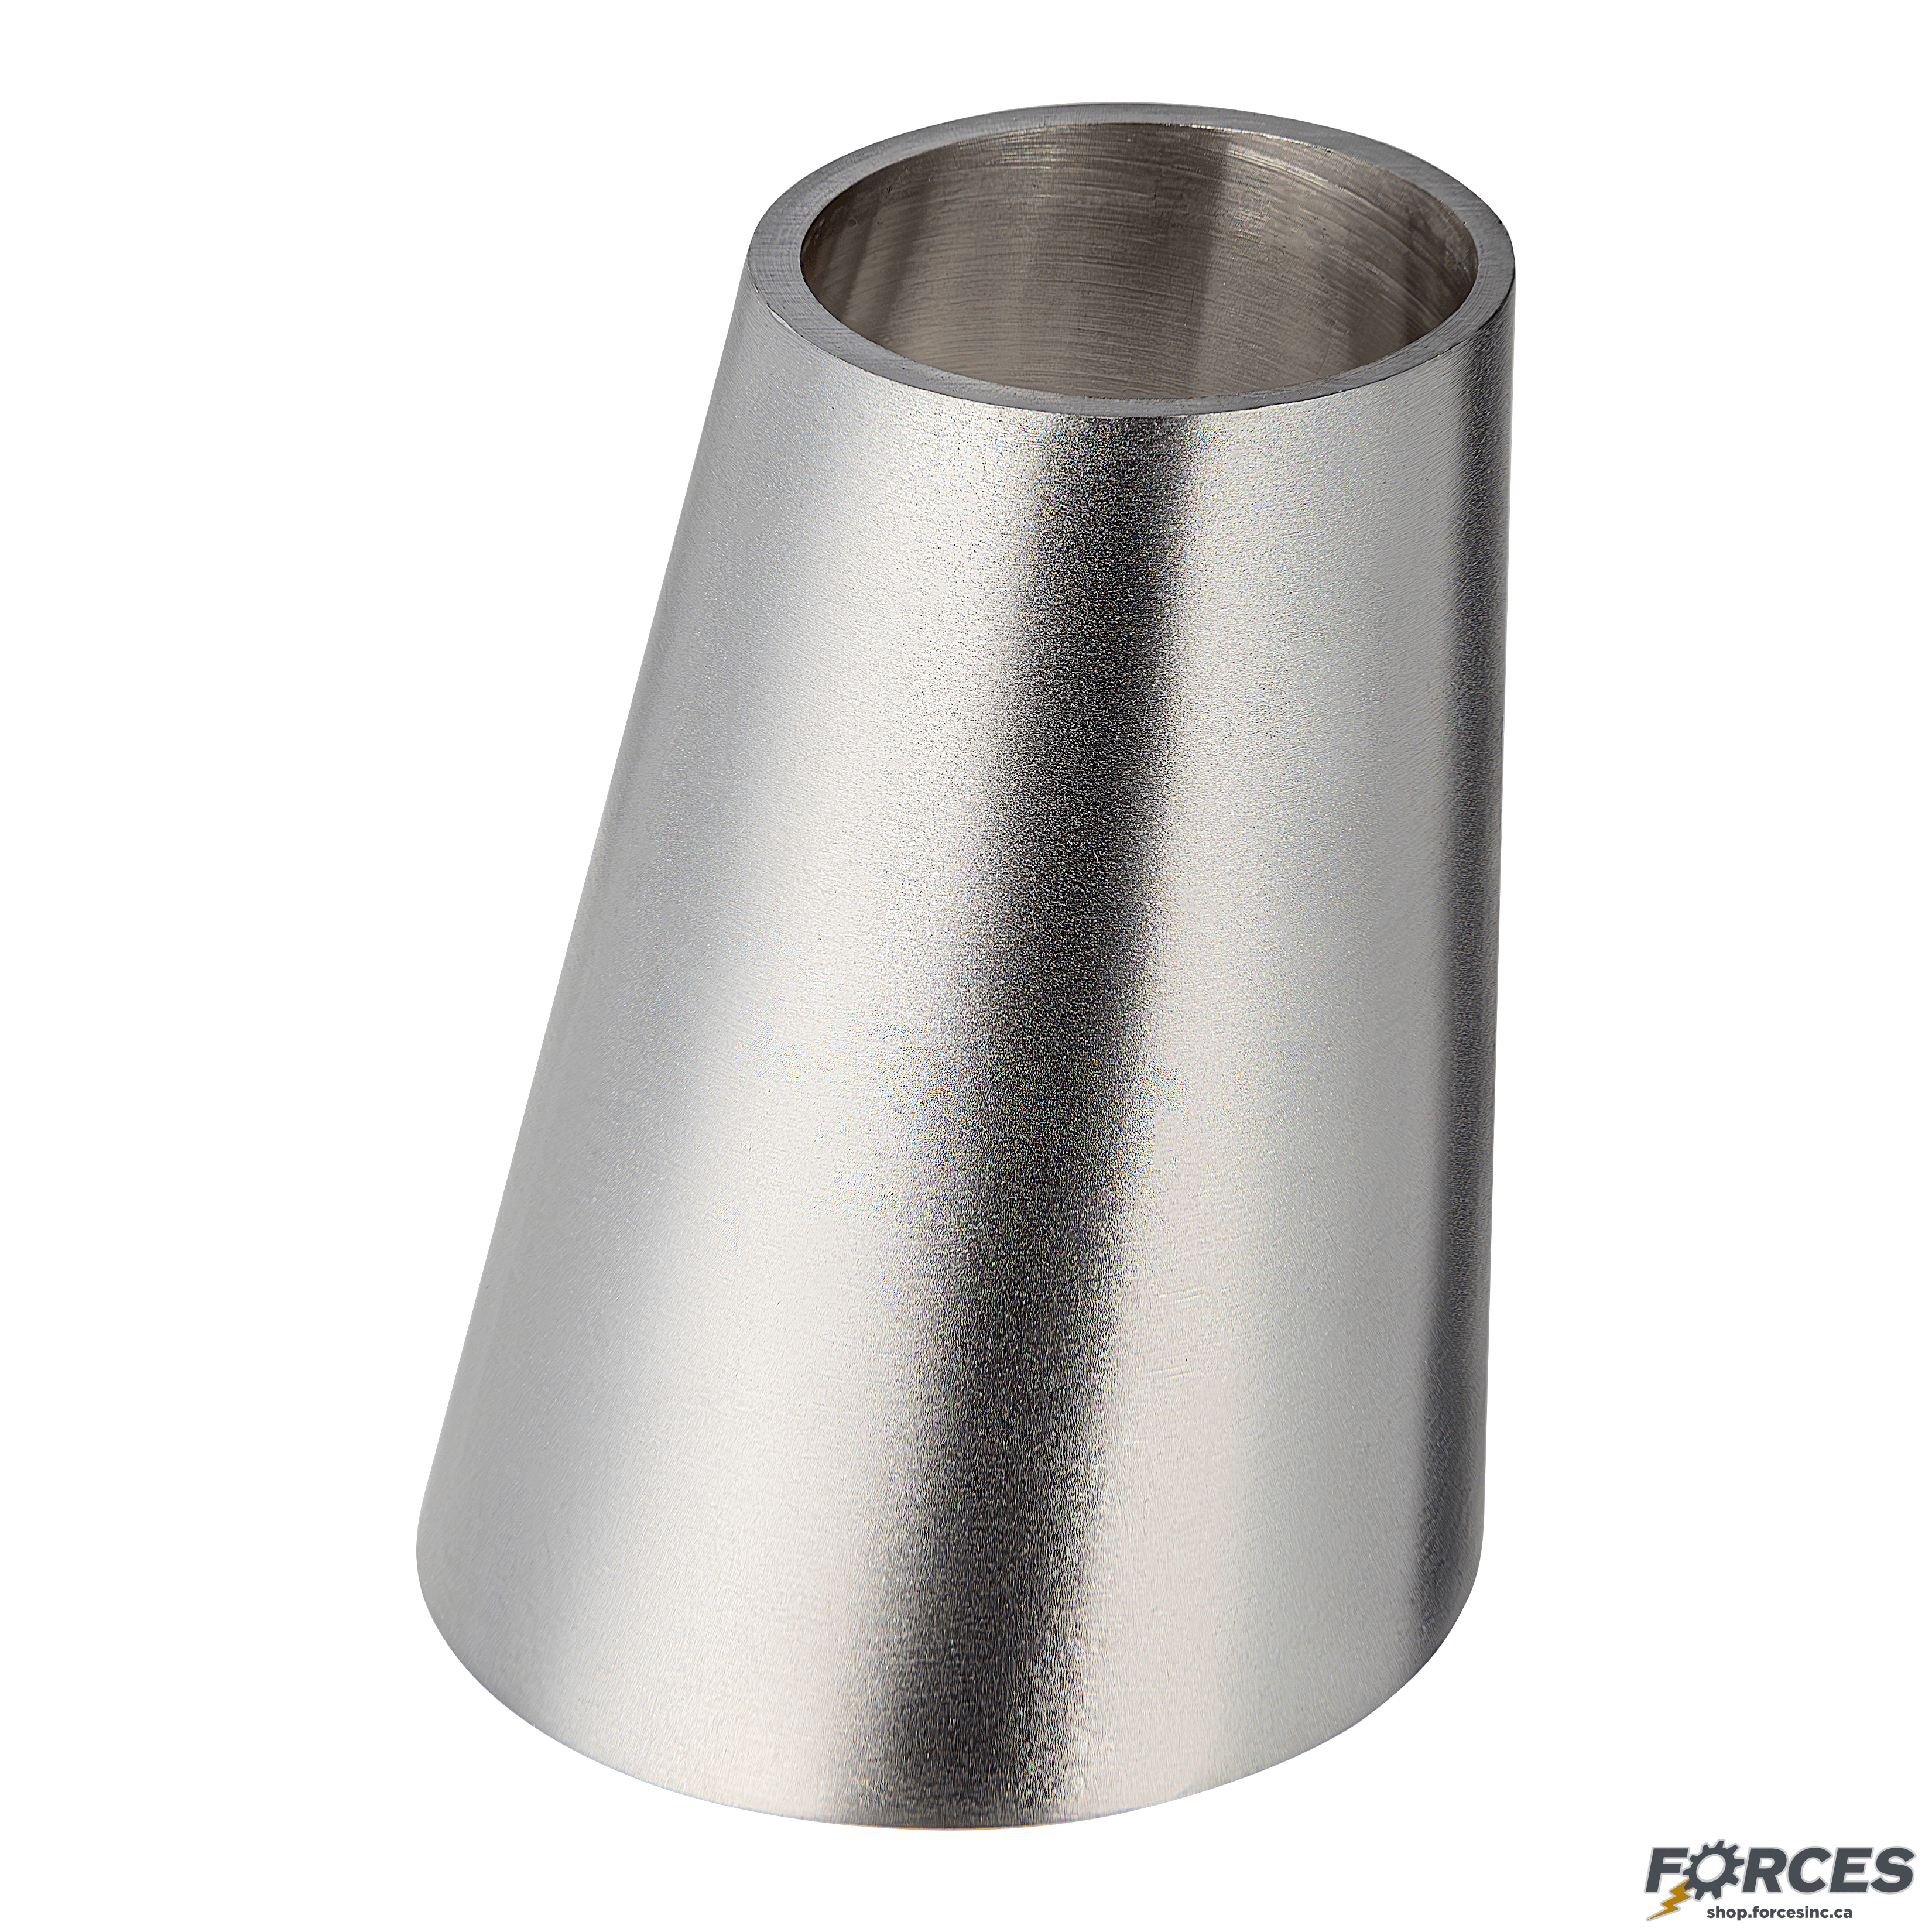 4" x 3" Butt Weld Eccentric Reducer - Stainless Steel 304 - Forces Inc